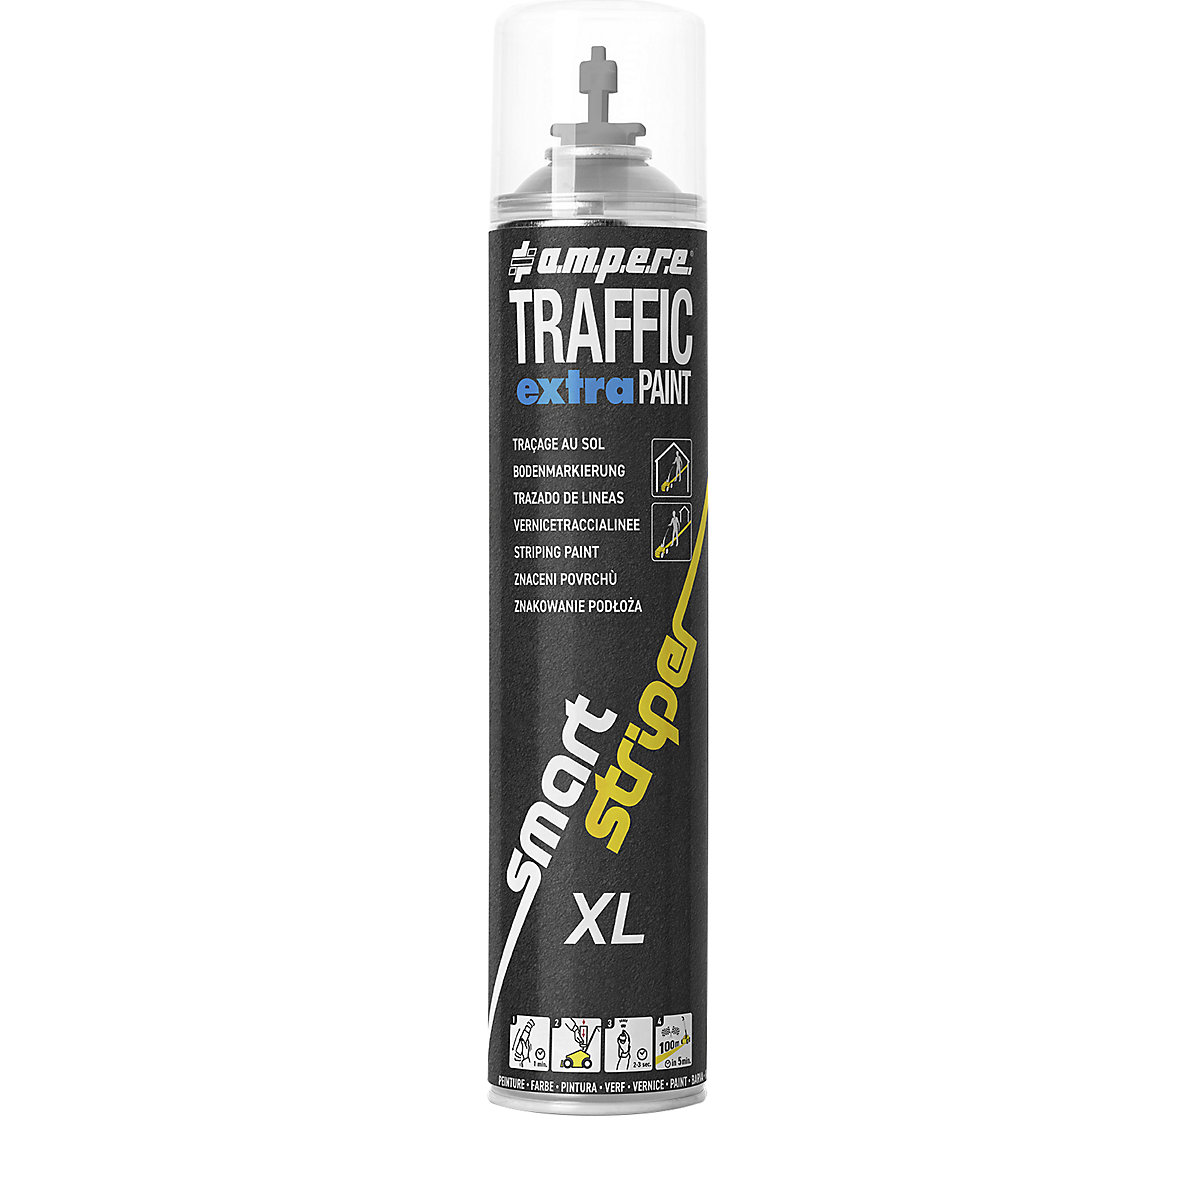 Traffic extra Paint® XL marking paint – Ampere